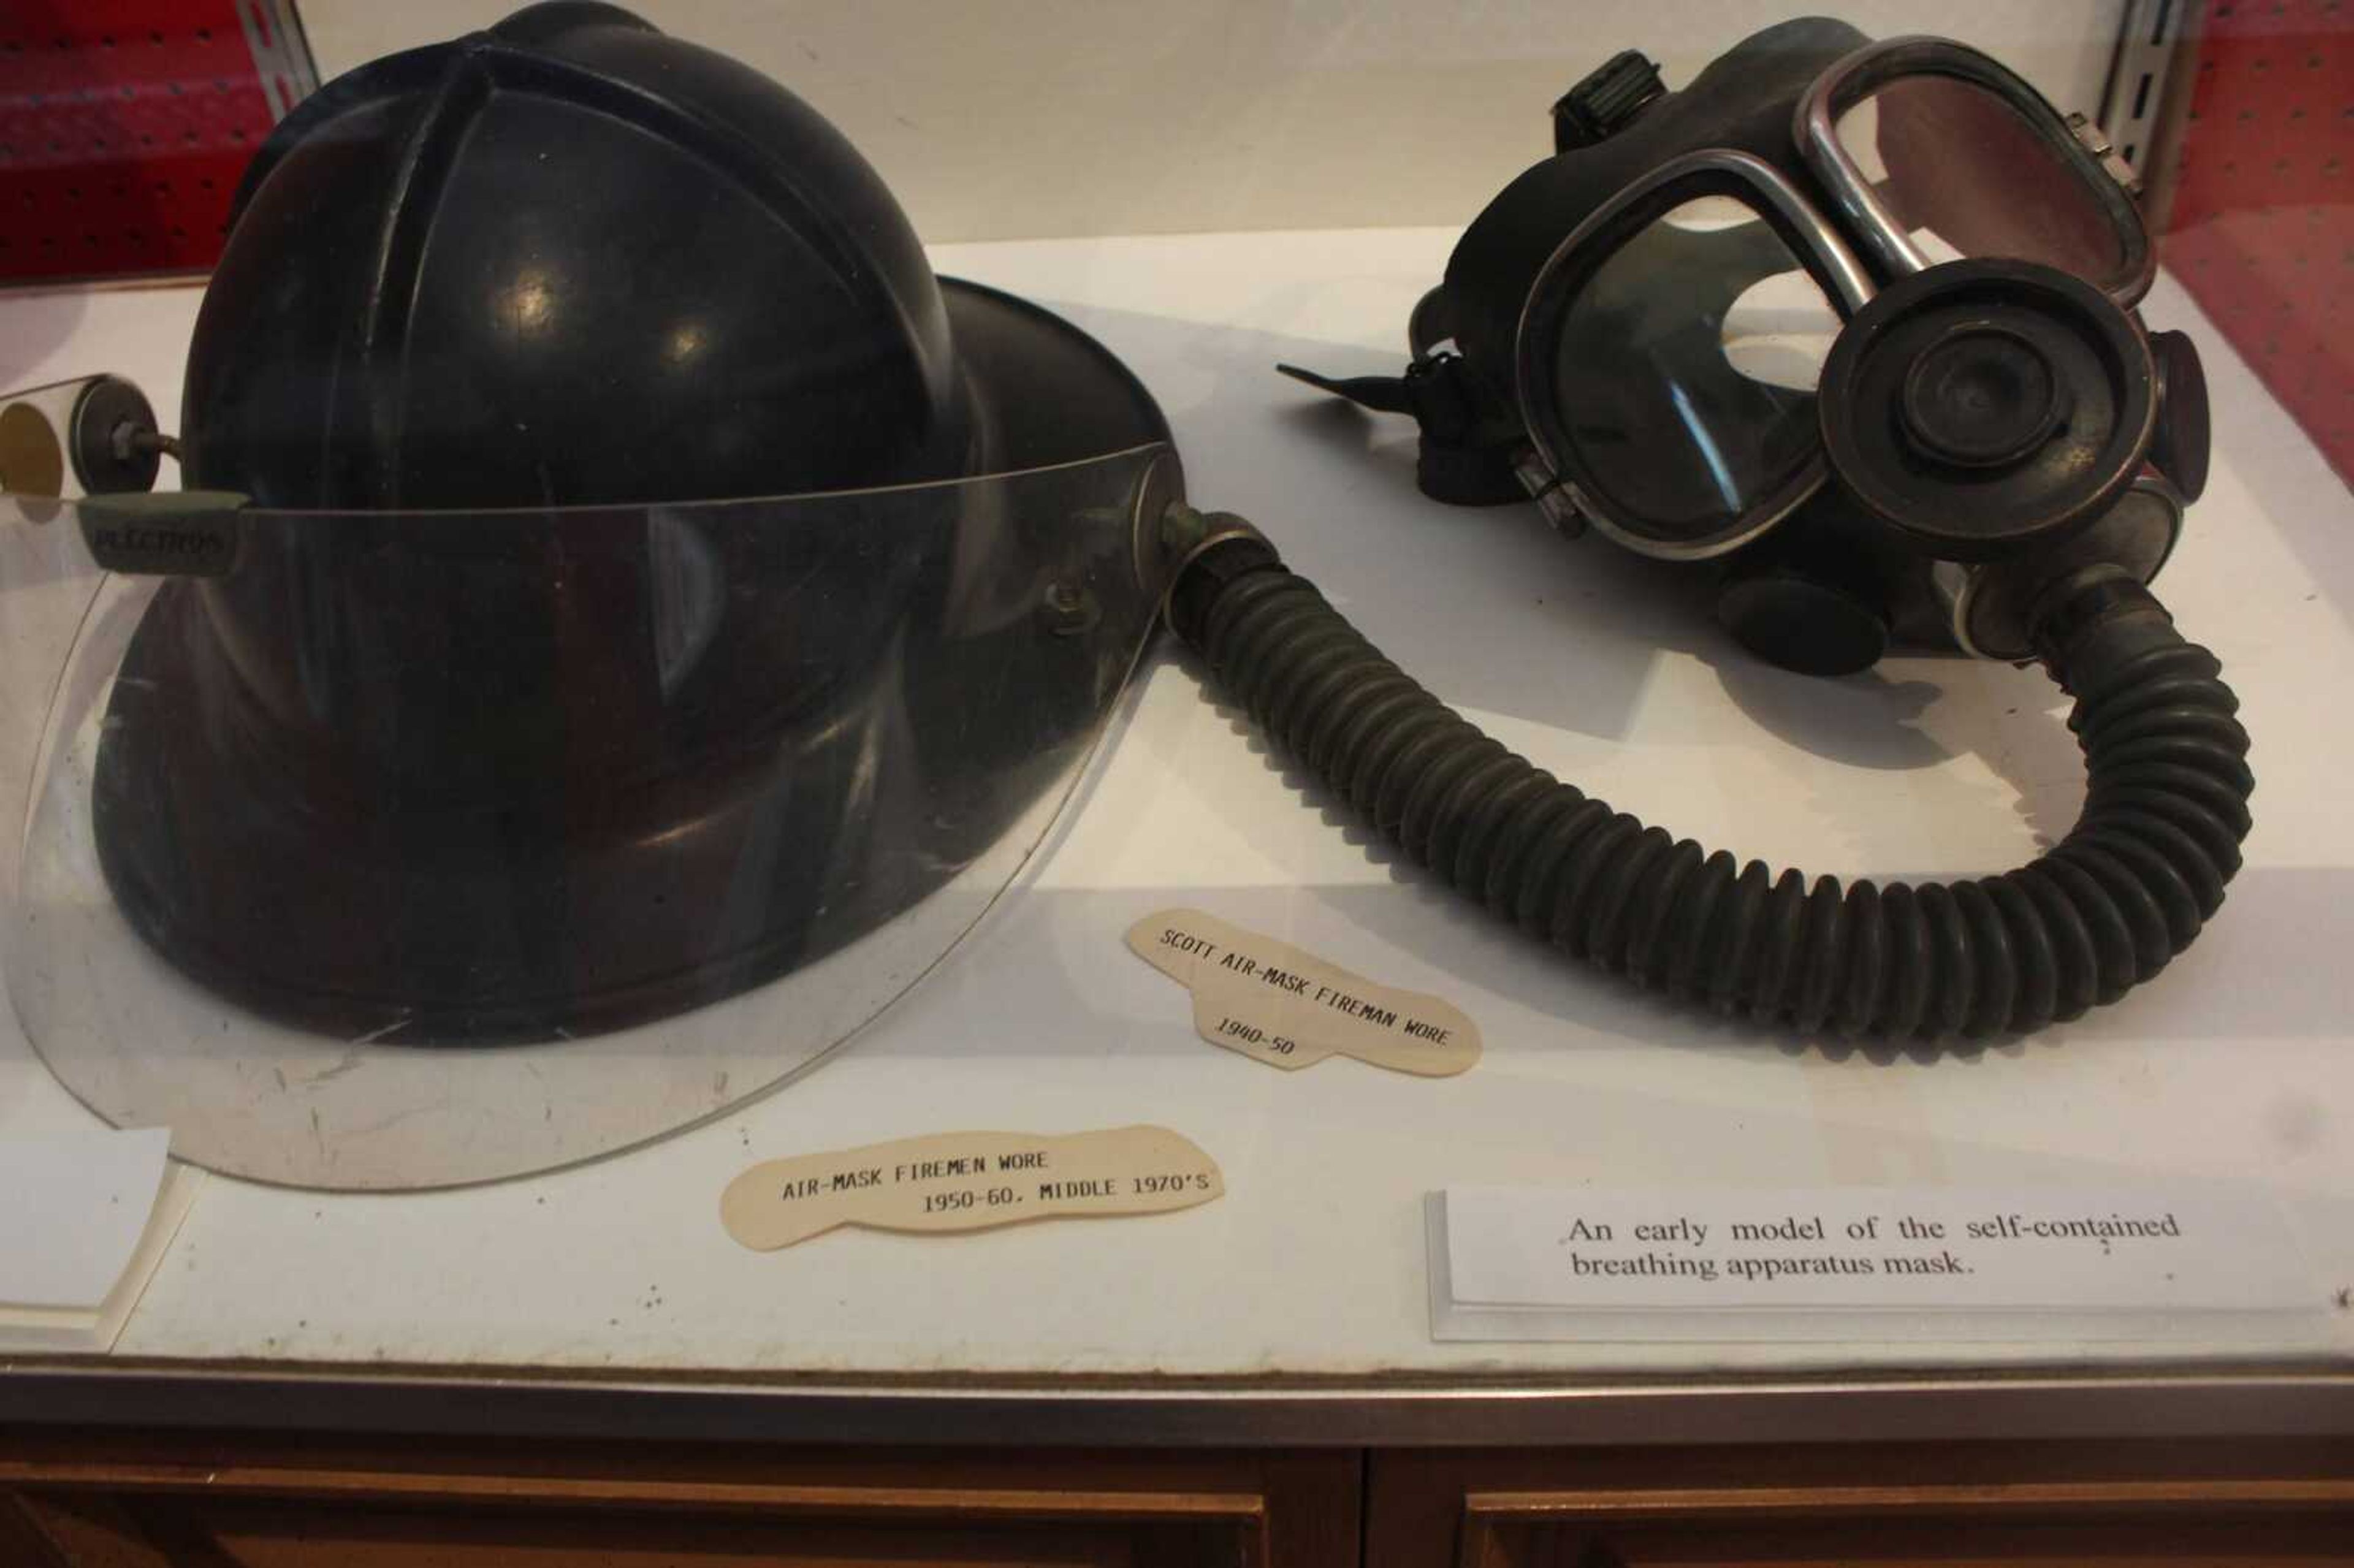 Early model of the self-contained breathing apparatus masks' on display at the Cape River Heritage Museum.